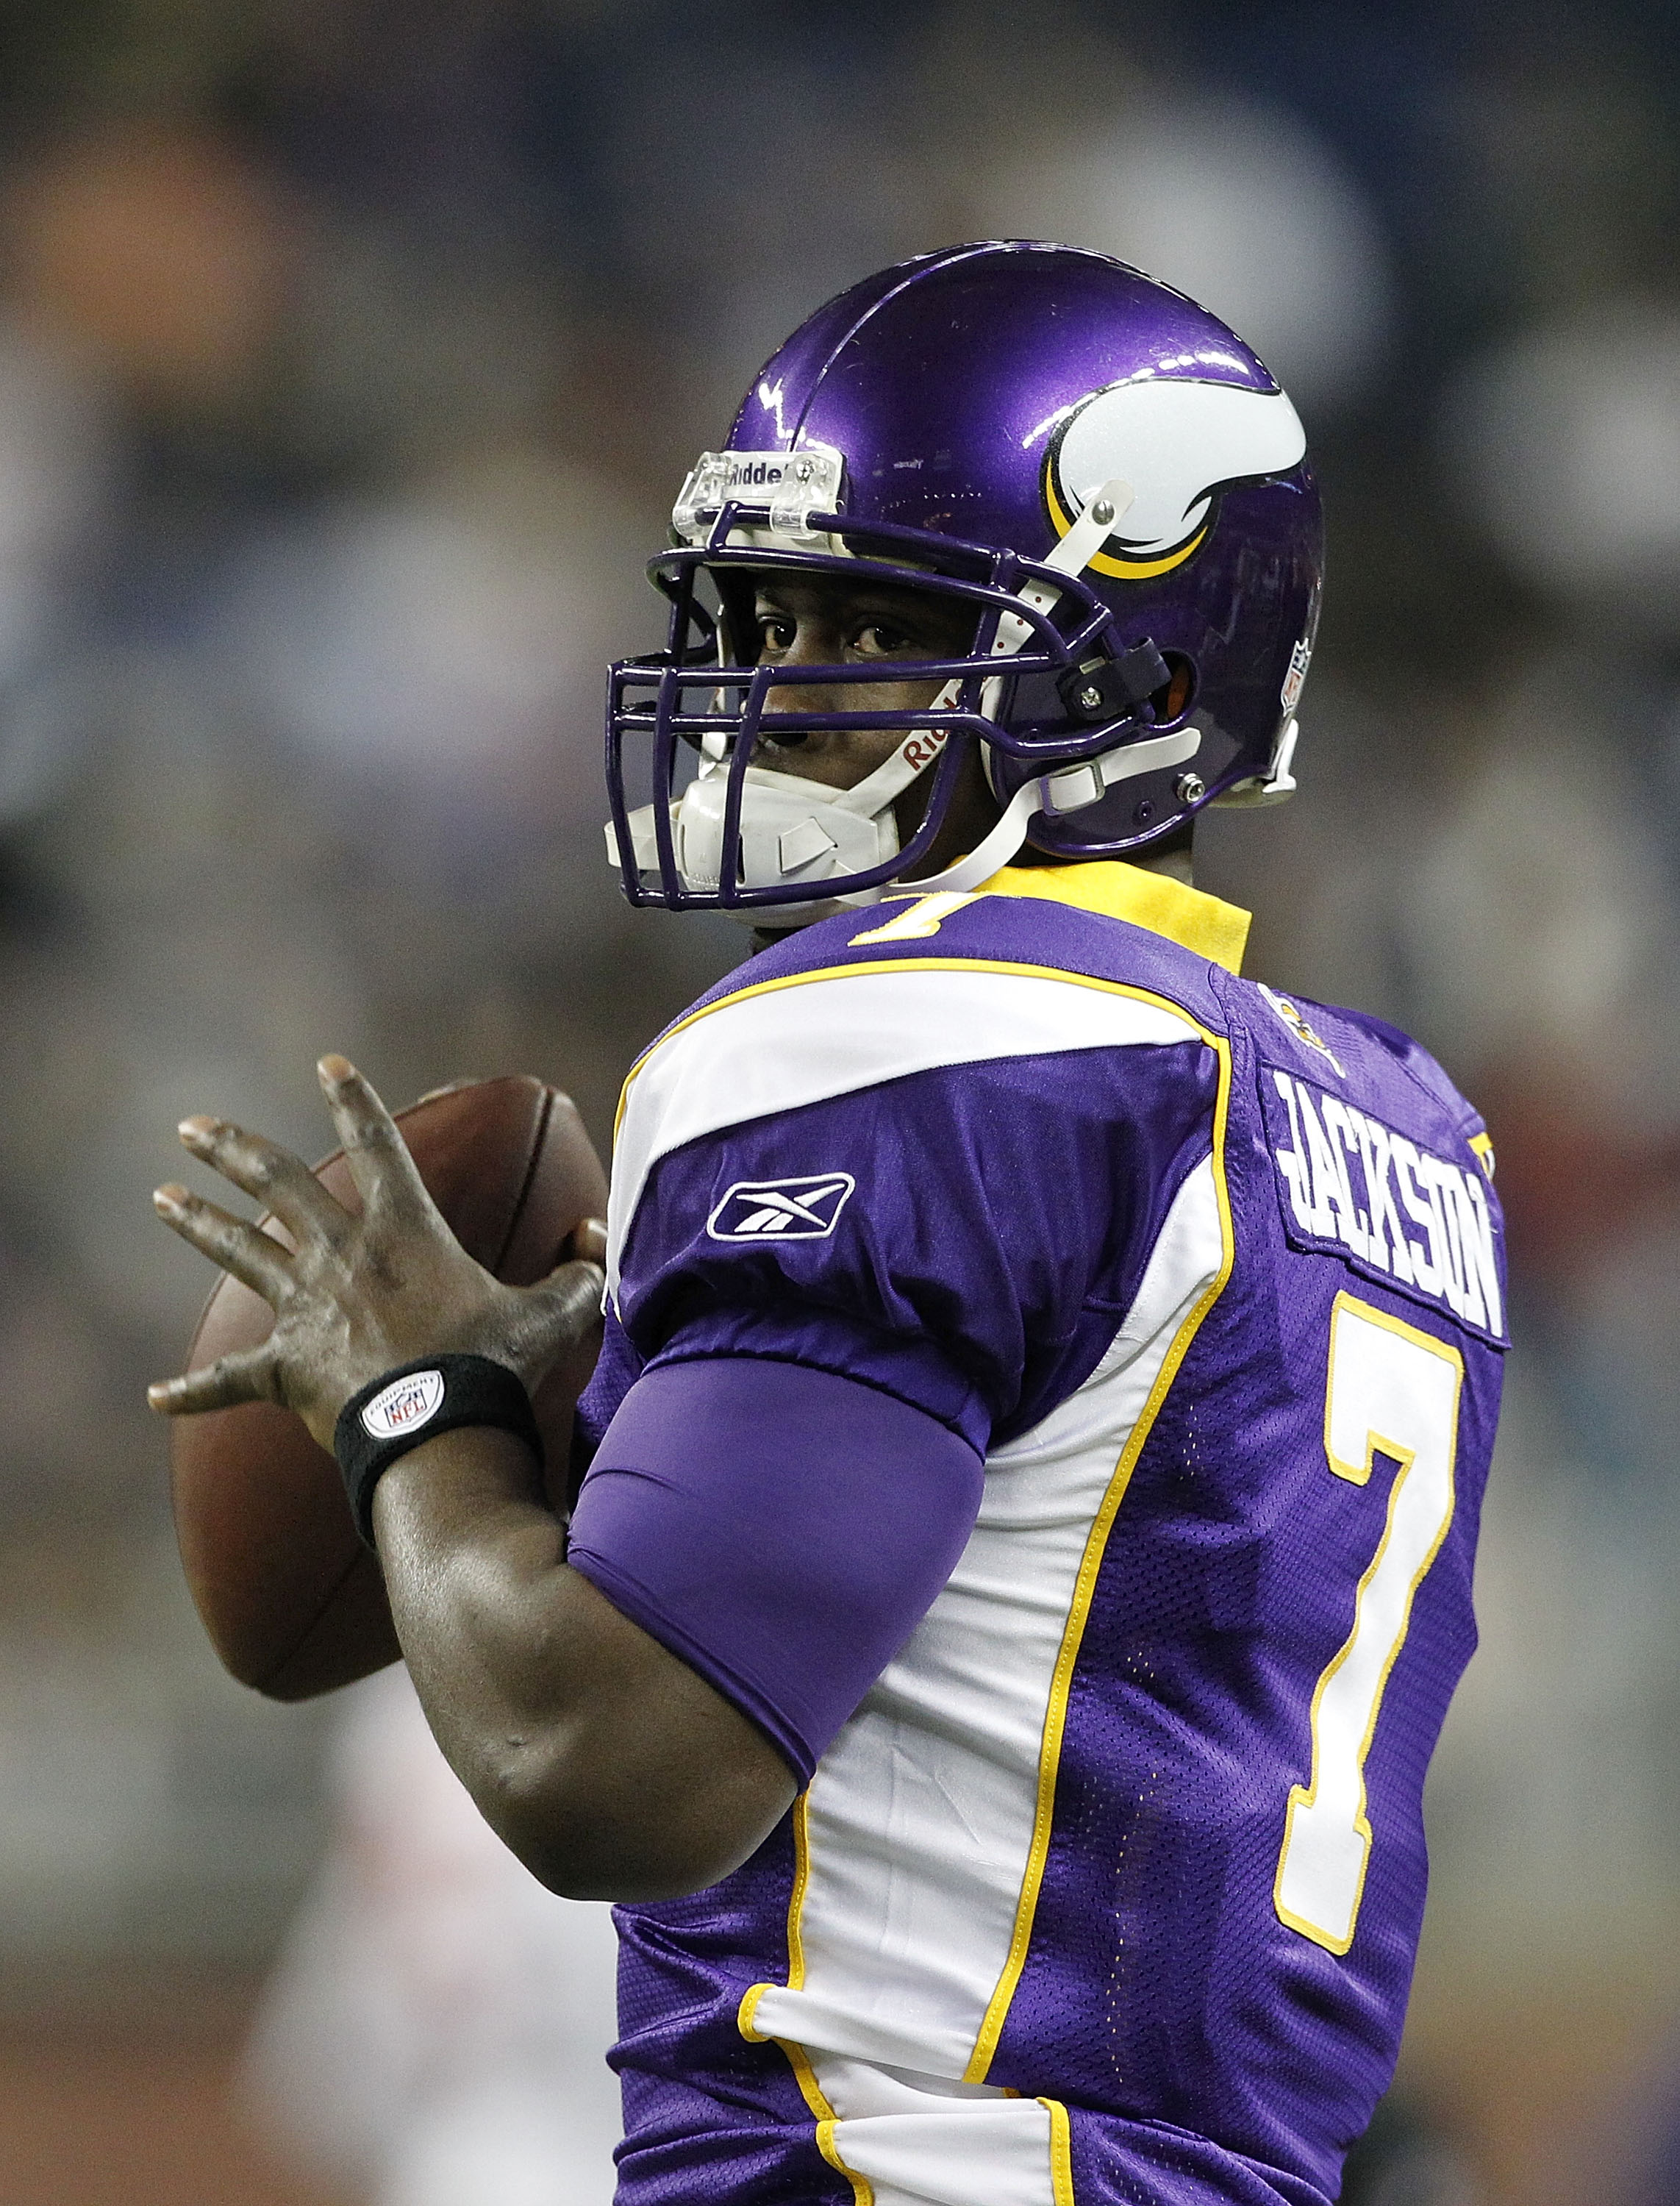 DETROIT, MI - DECEMBER 13: Tavaris Jackson #7 of the Minnesota Vikings warms up prior to the start of the game against the New York Giants on December 13, 2010 in Detroit, Michigan.  (Photo by Leon Halip/Getty Images)